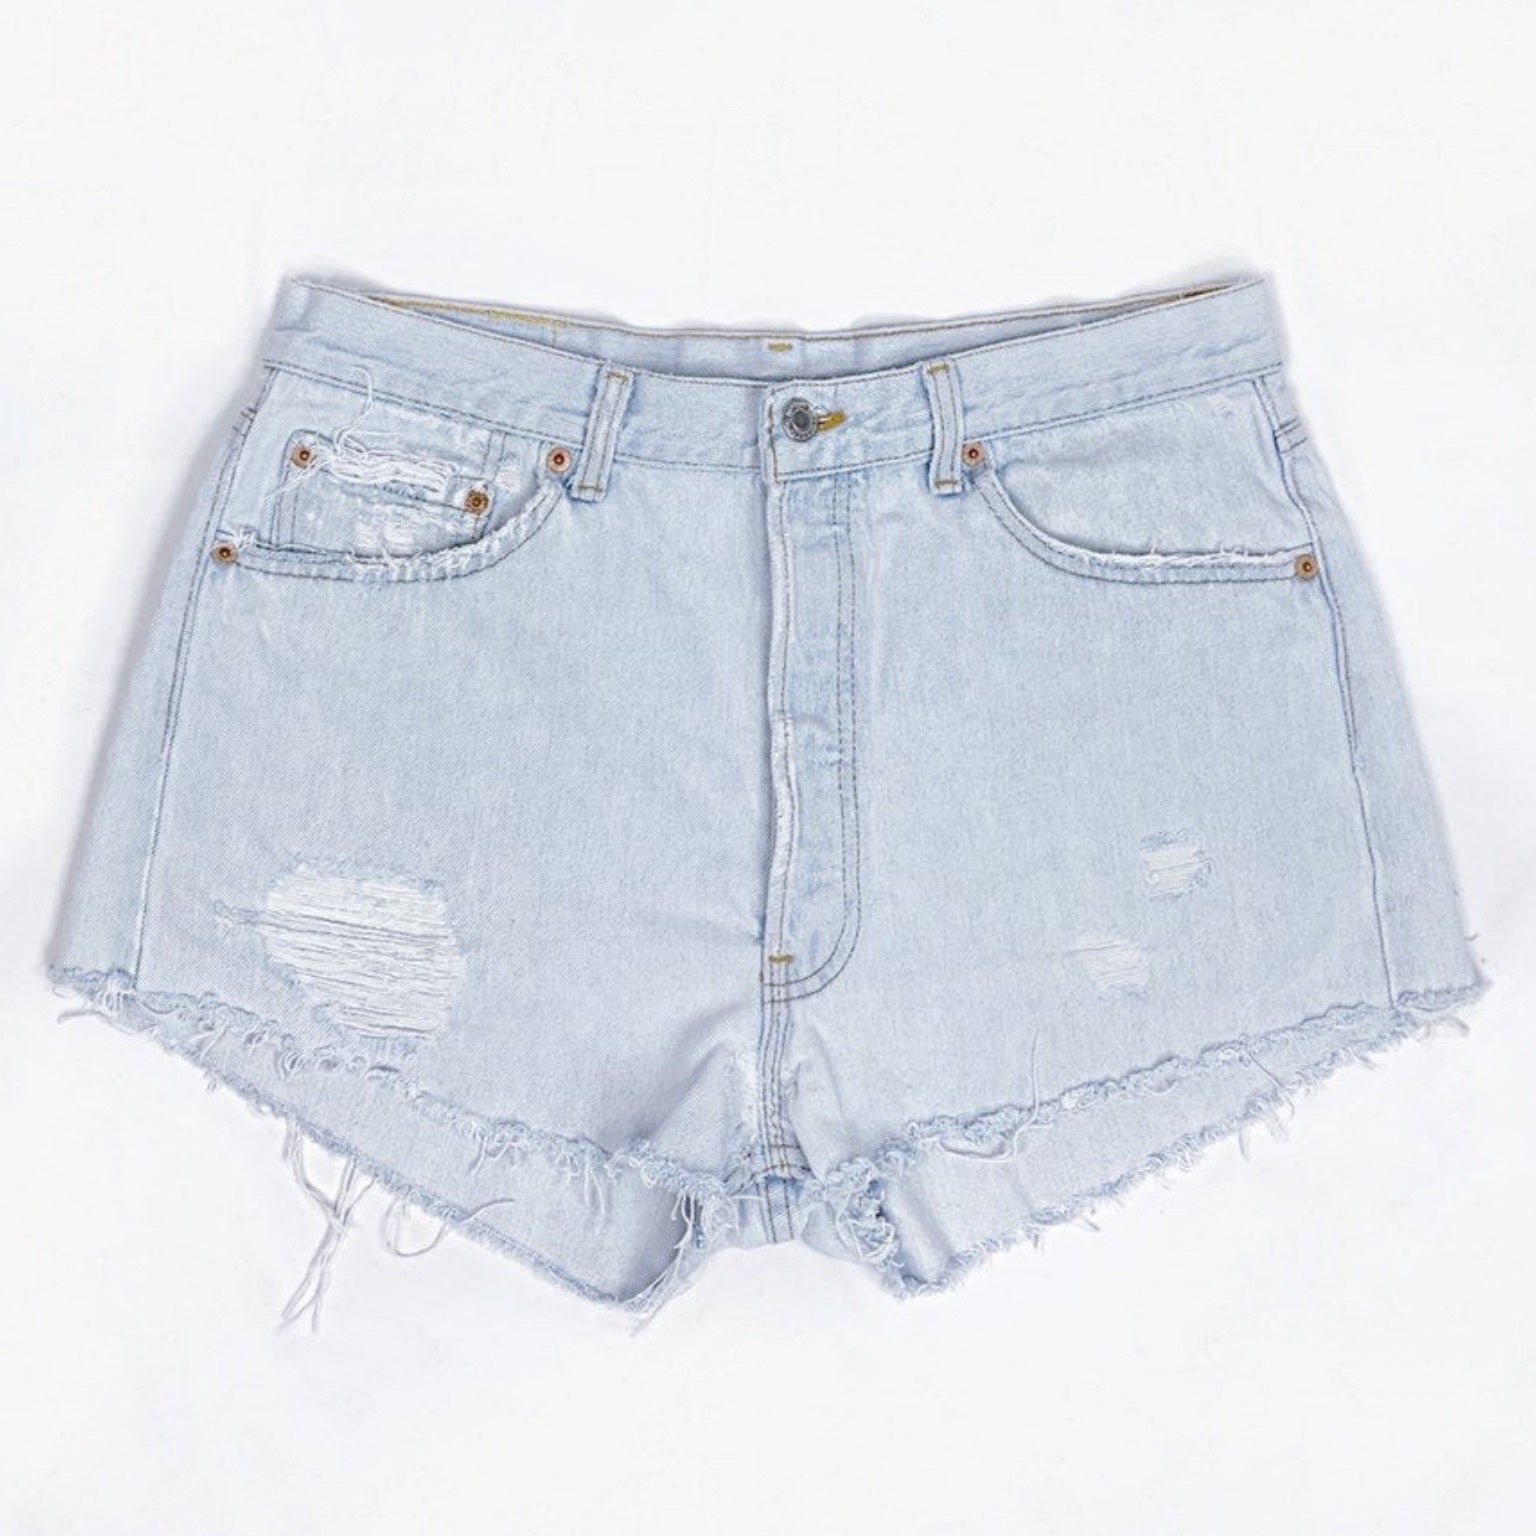 Vintage 501 Size 36 Distressed Light Wash High Waisted Levis Shorts